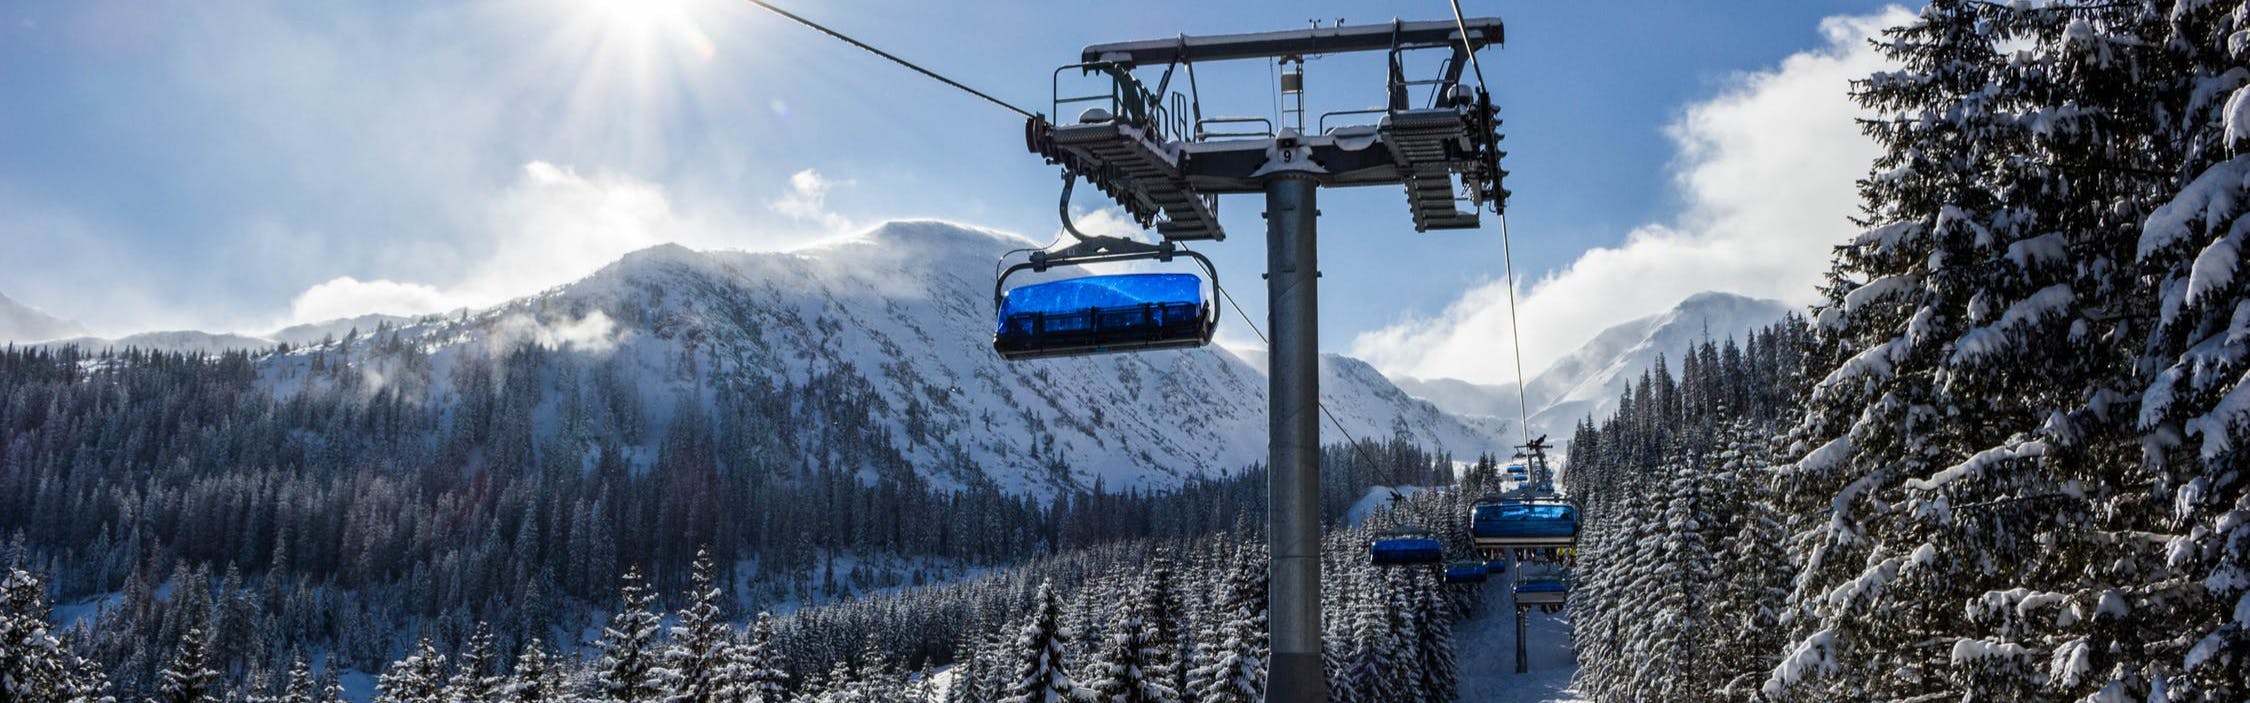 Chairlifts run up a tree-covered slope.